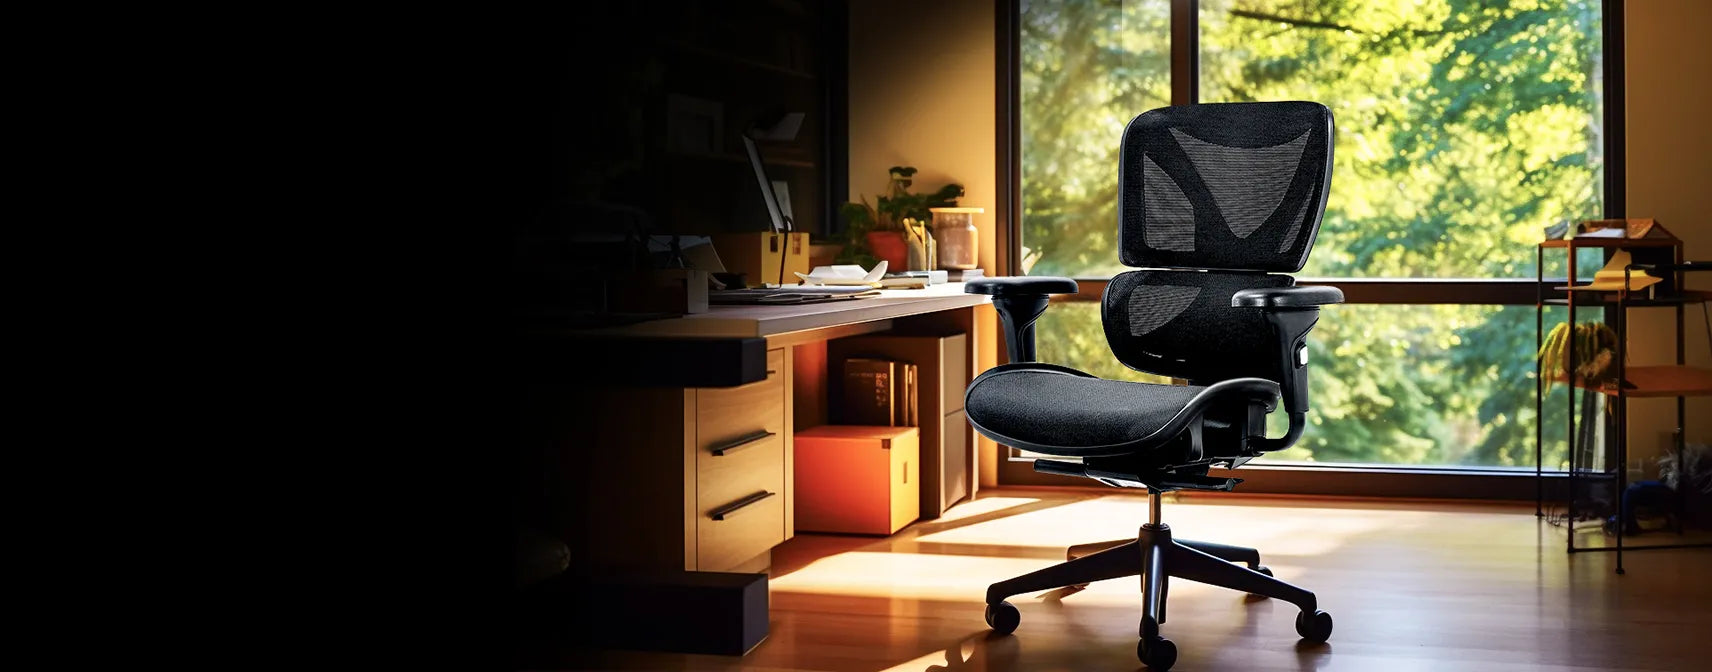 Bea Ergonomic Office Chair with breathable mesh back and plush seating, featured in a bright home office with a scenic view, perfect for modern professionals